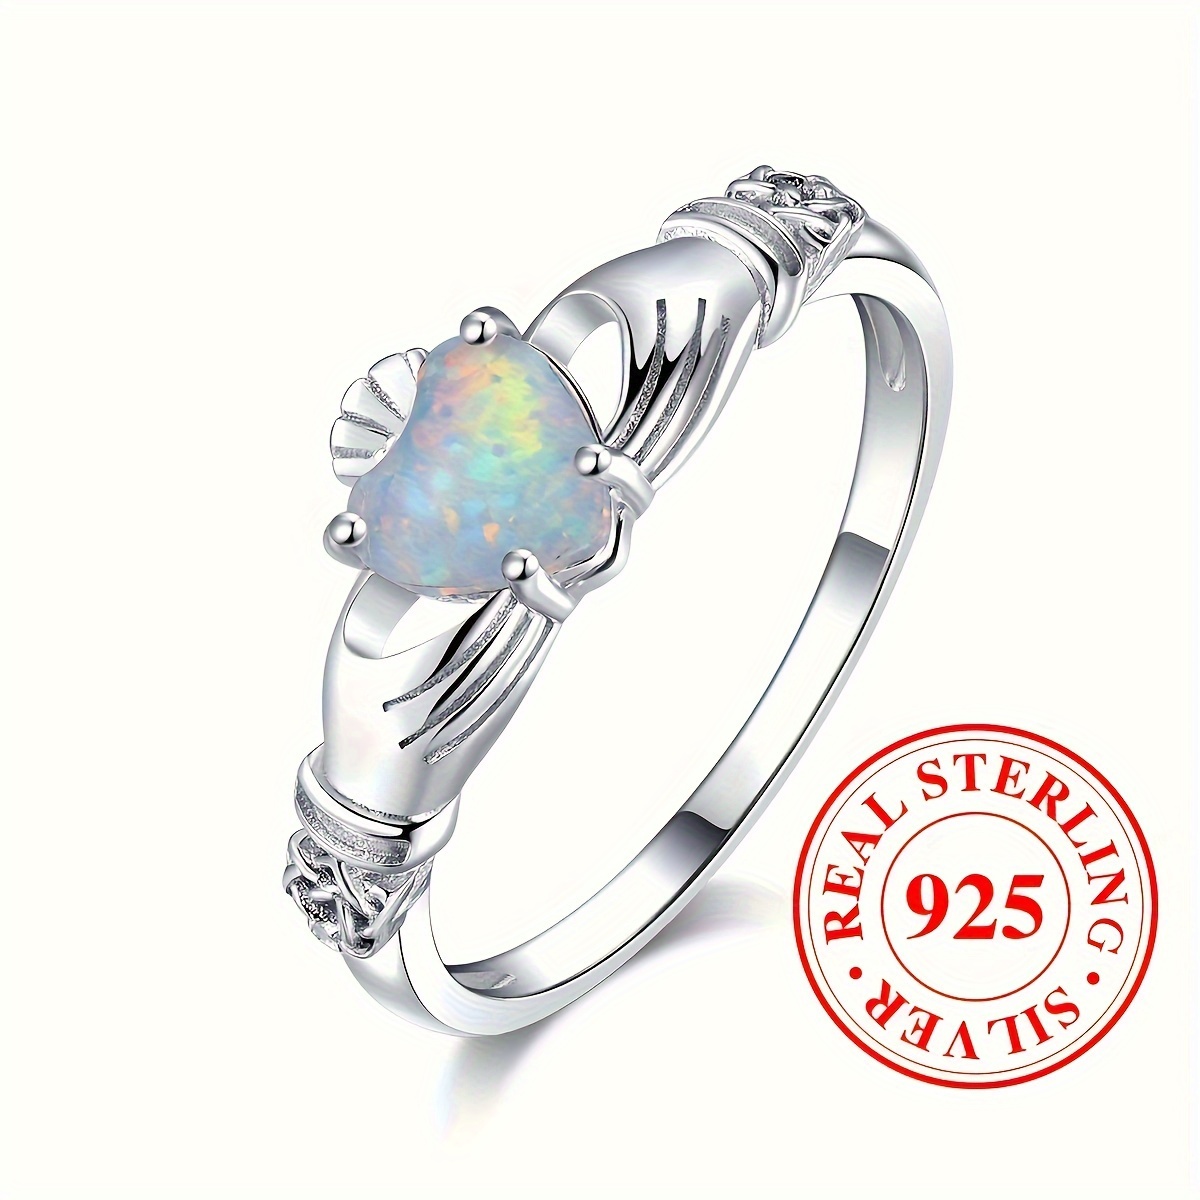 

925 Sterling Silver Ring Classy Claddagh Design Inlaid Opal In Heart Shape High Quality Engagement/ Wedding Ring Gift For Her